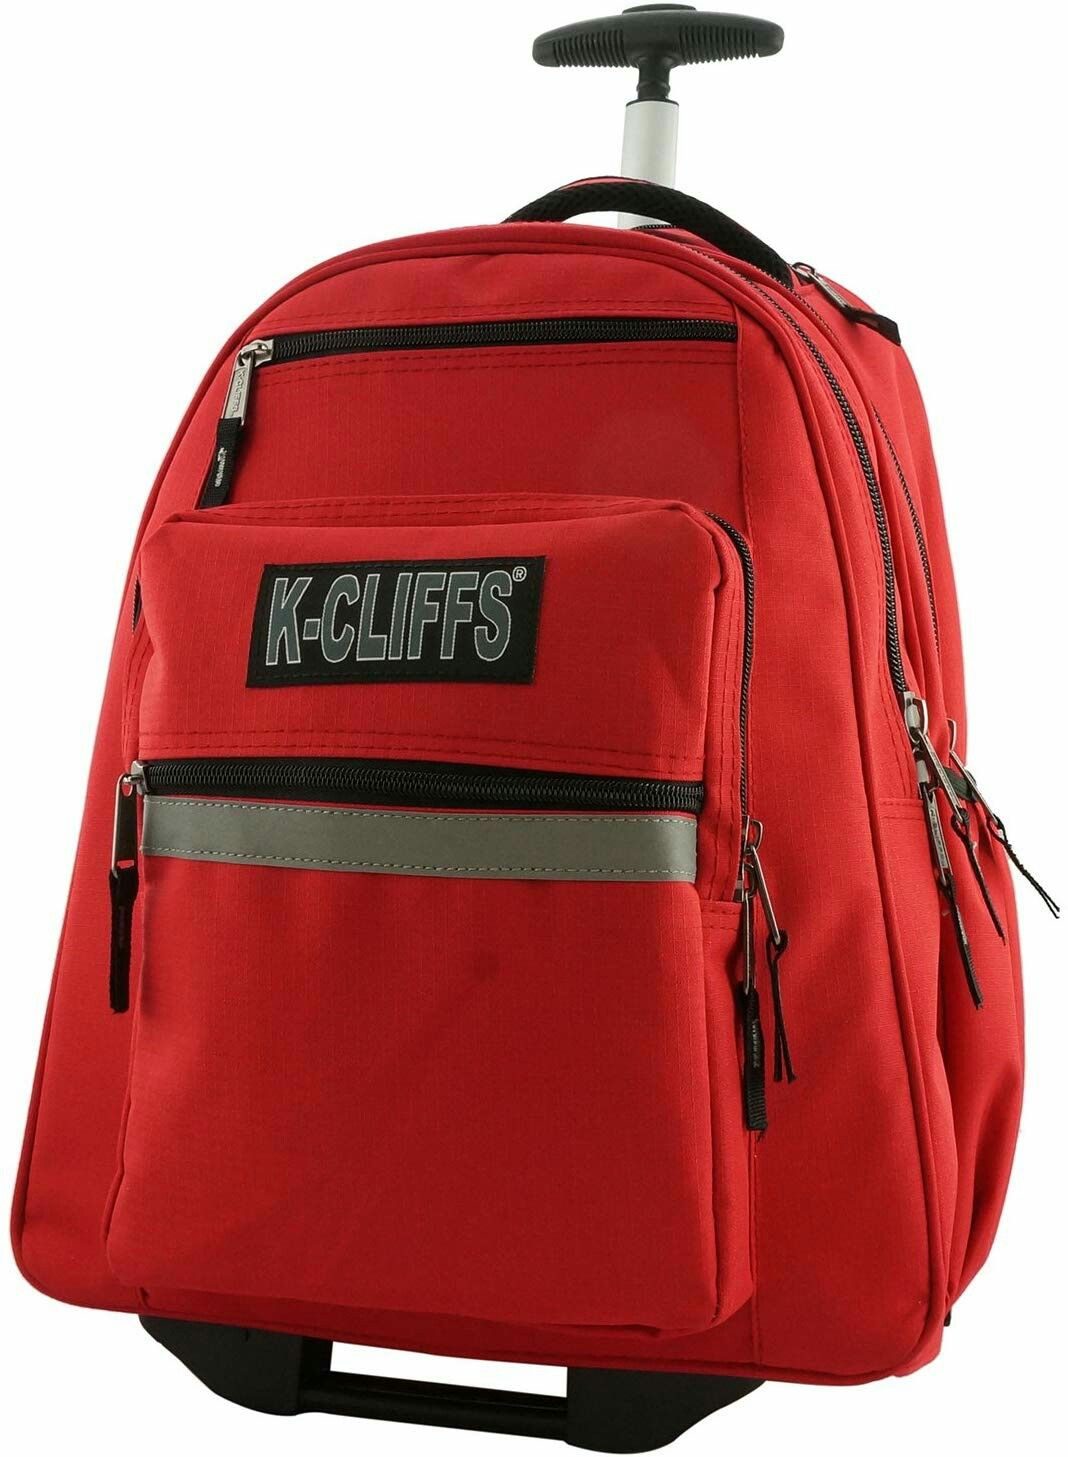 Heavy Duty Rolling Student School Bag with Wheels Deluxe Trolley Bookbag Wheeled Daypack Multiple Pockets with Safety Reflective Stripe Red